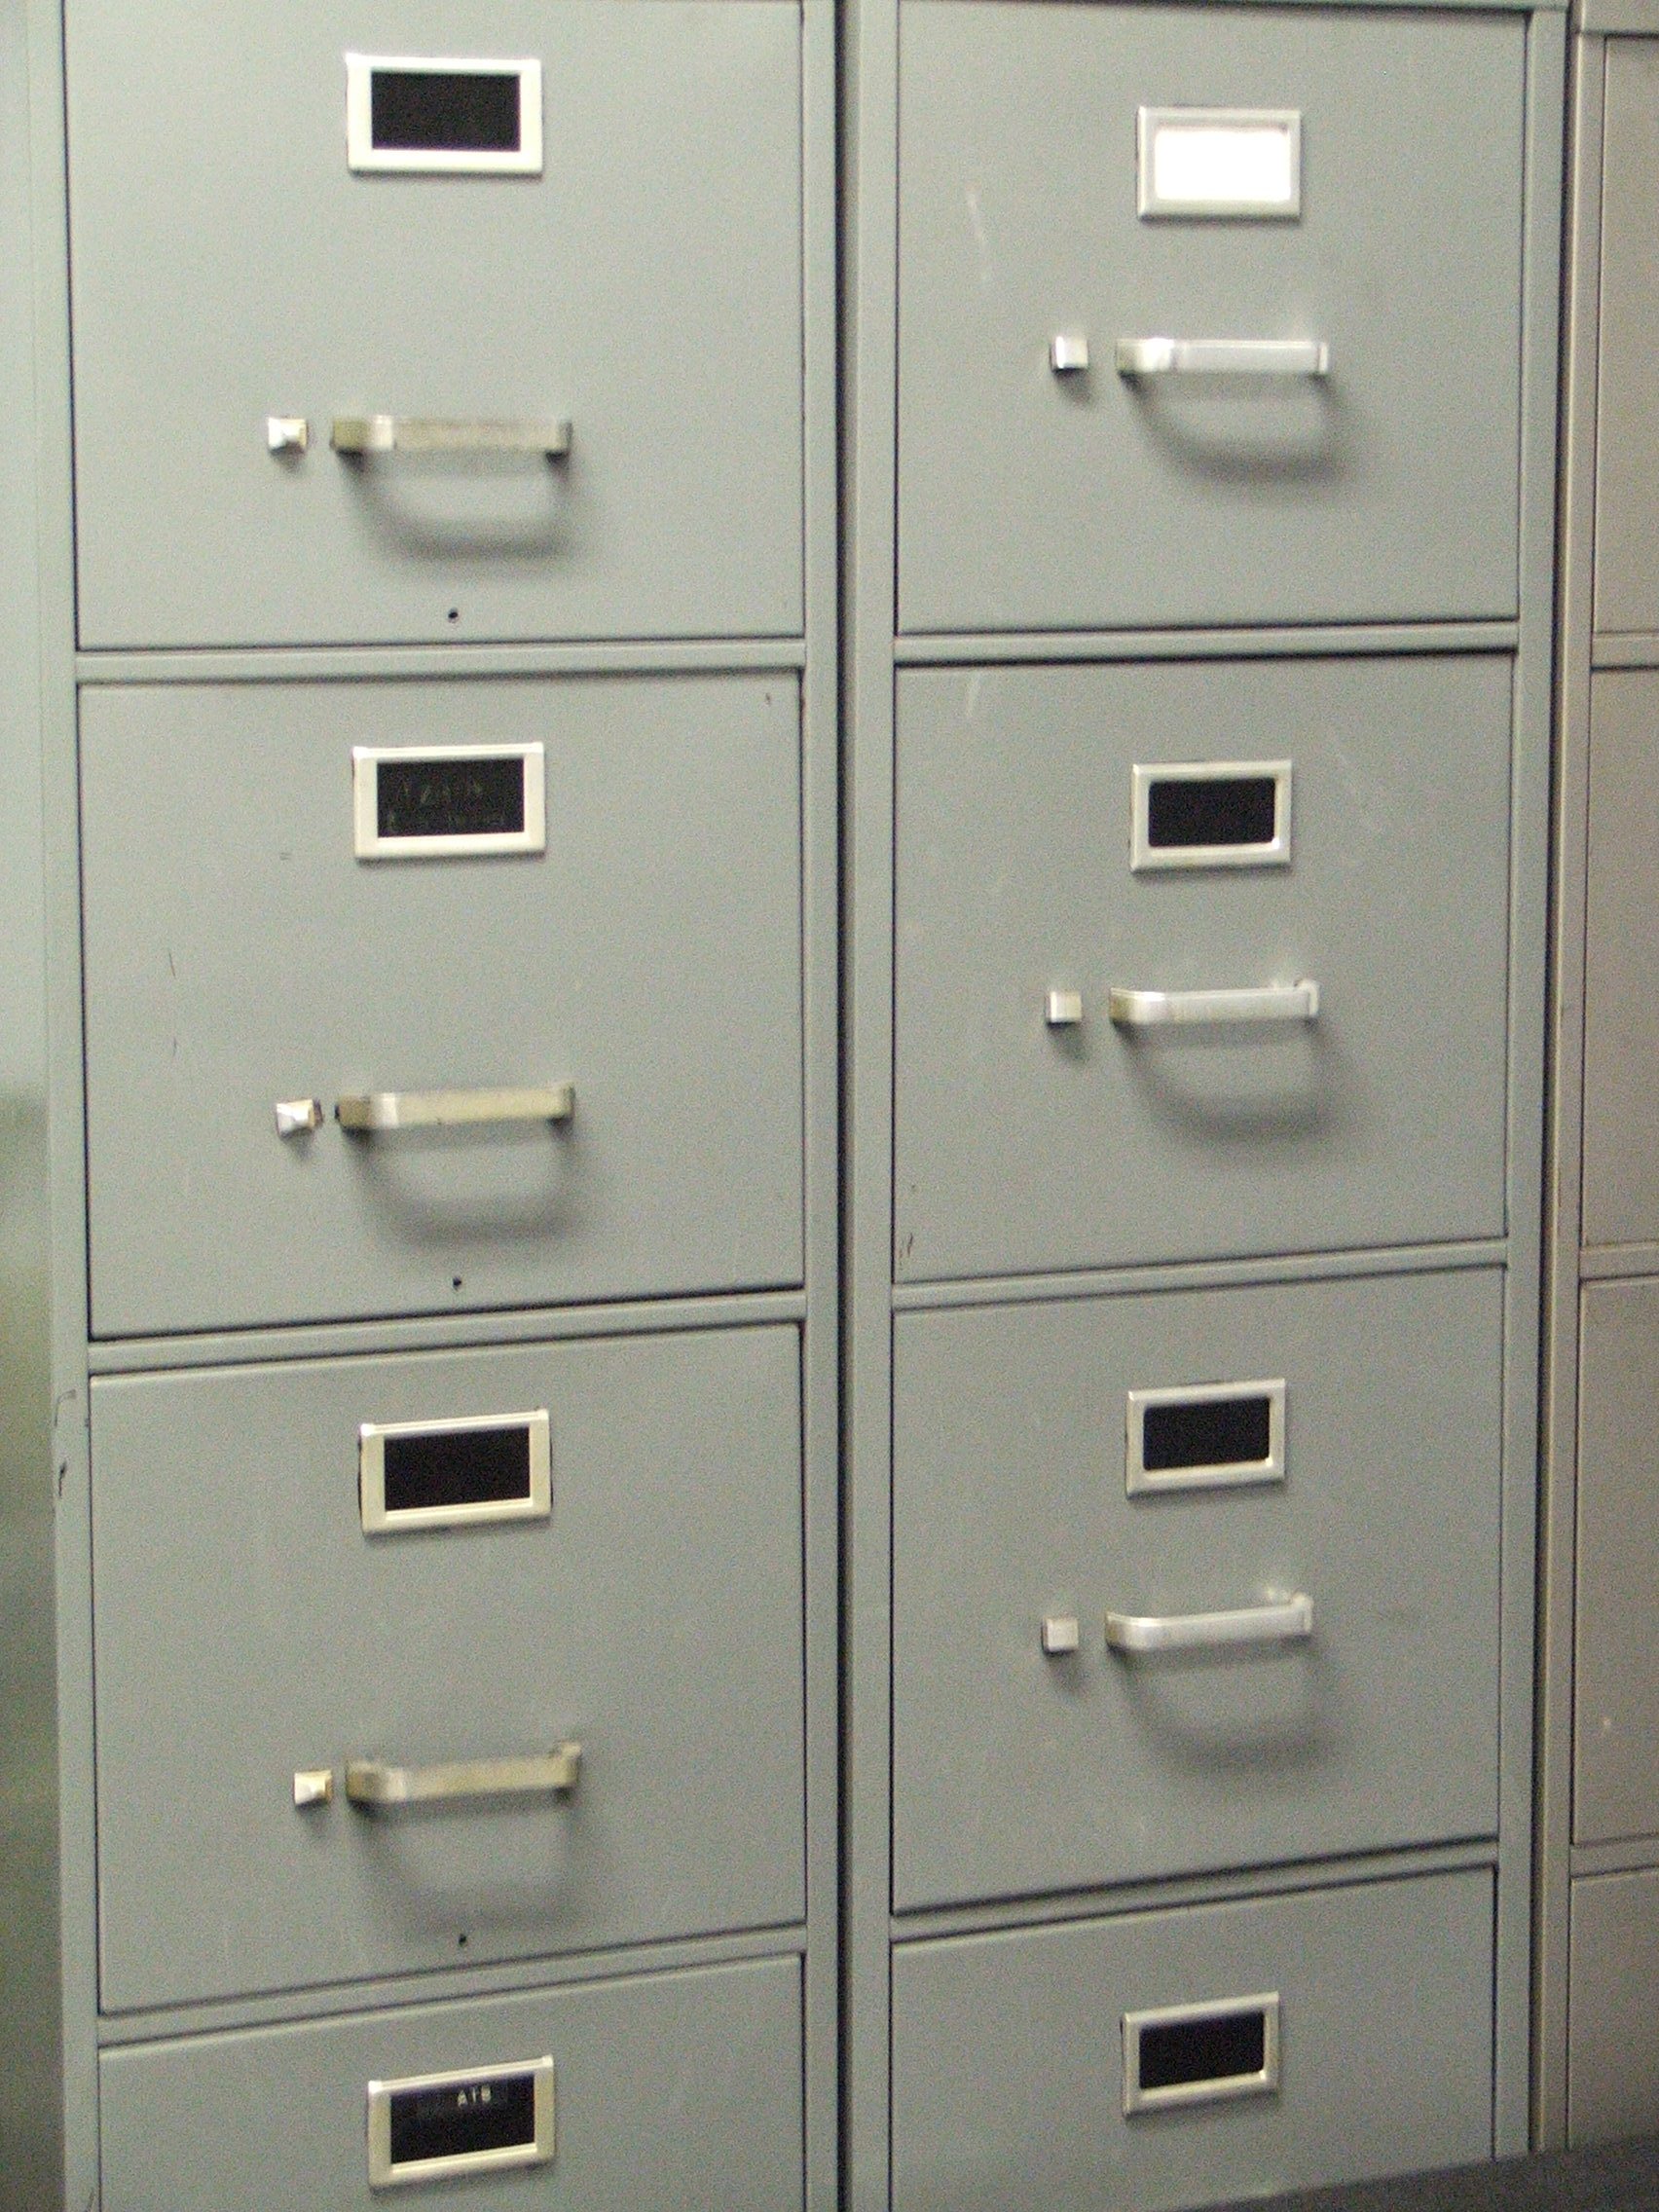 Get Personal with Your Filing System